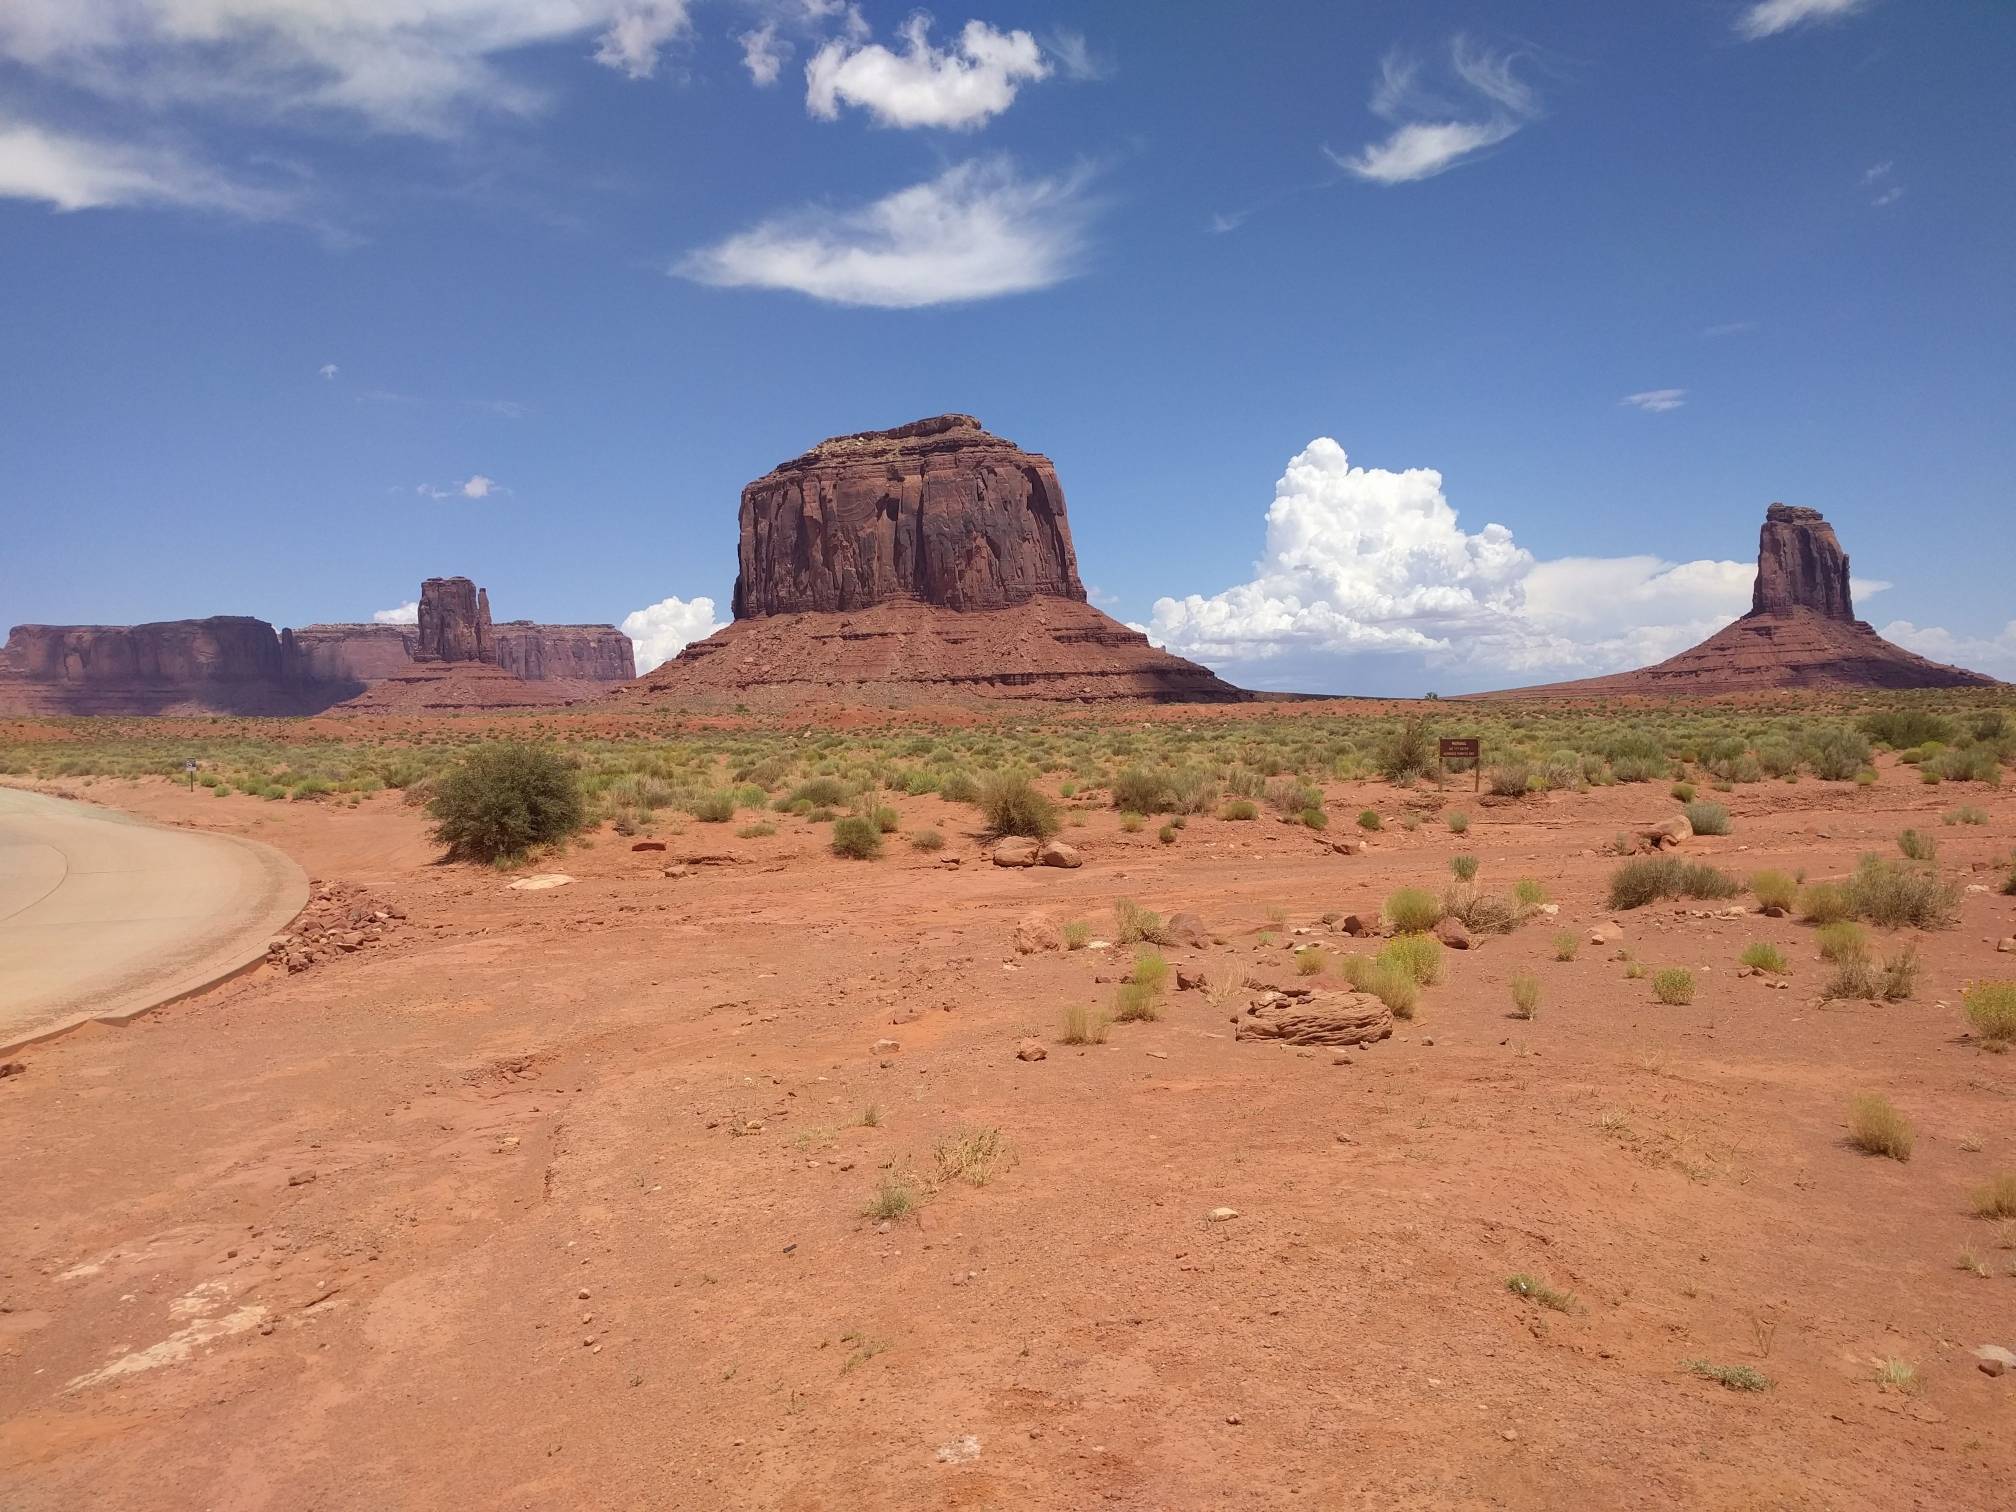 Image: A view of the West Mitten (left), Merrick (center), and the East Mitten buttes (right) from the Valley Road